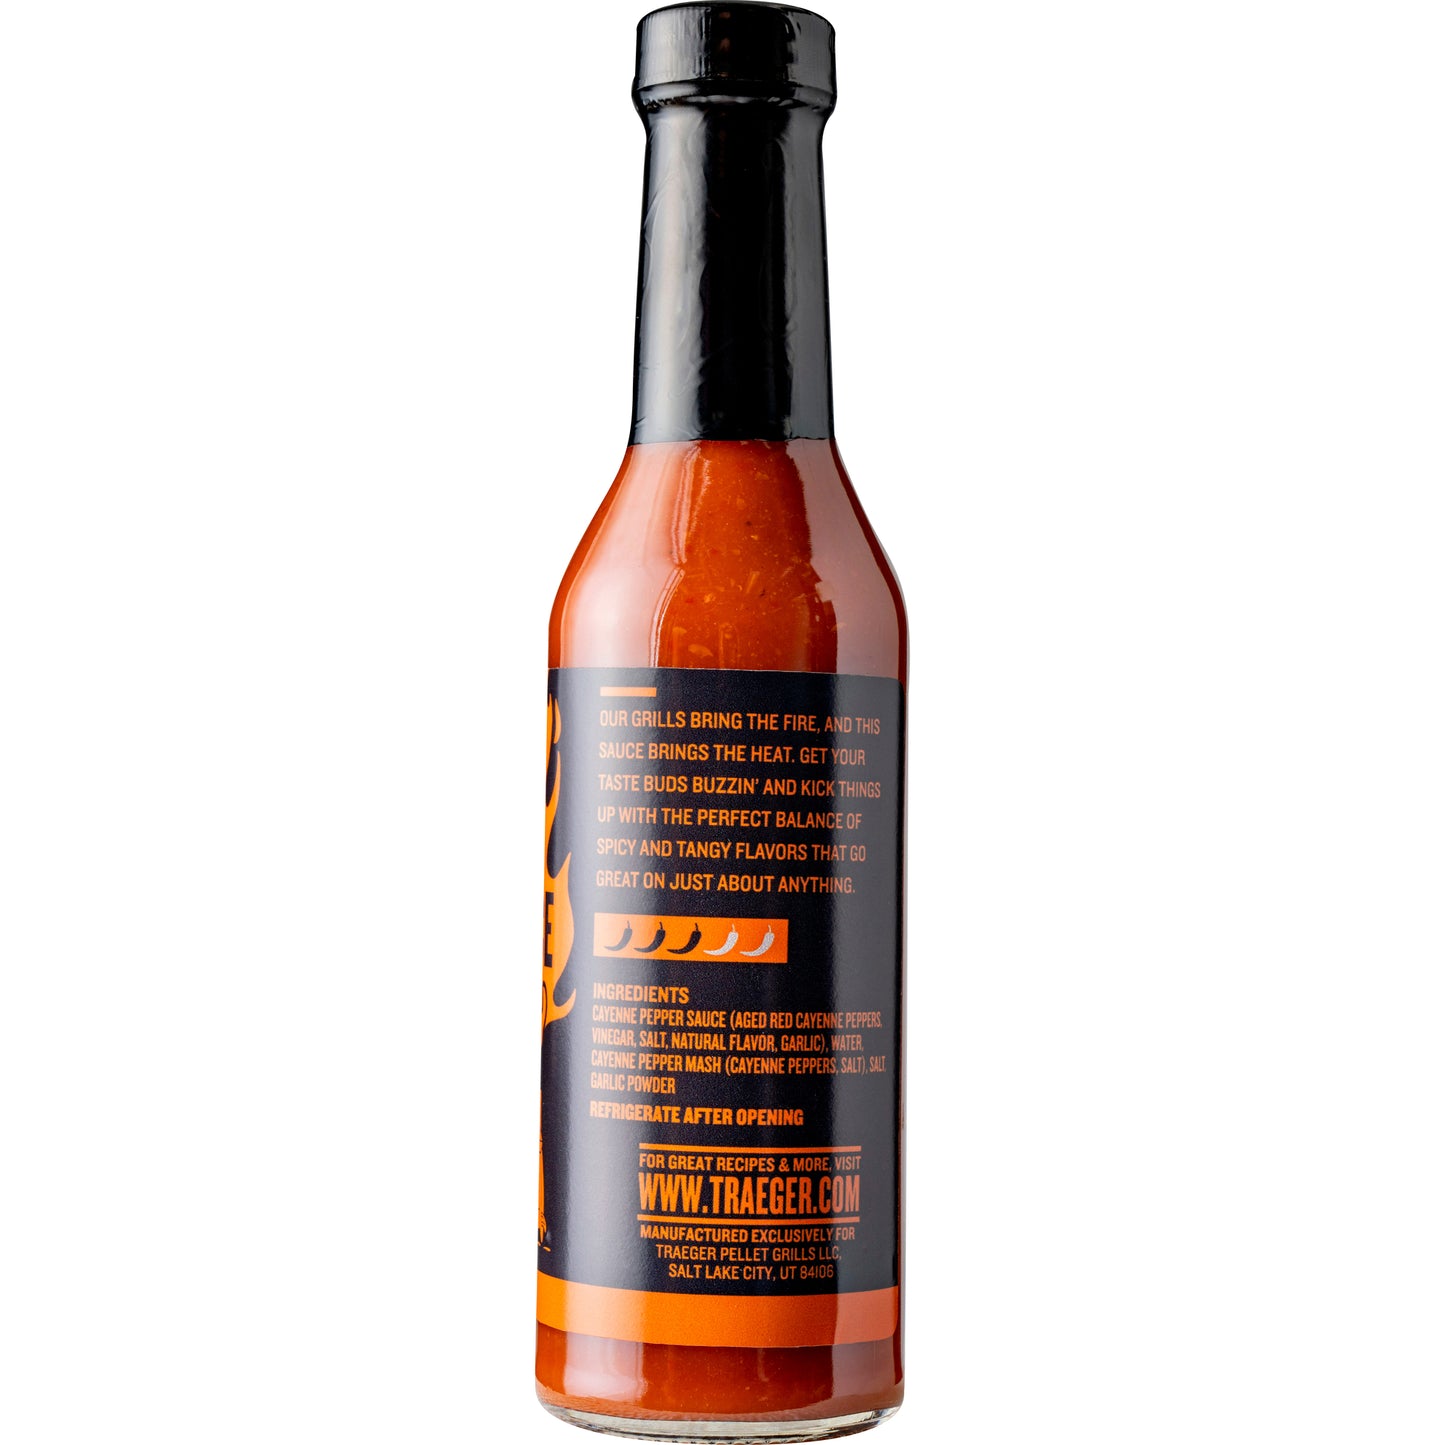 Traeger Original Hot Sauce is a 3 out of 5 on the Traeger heat scale.